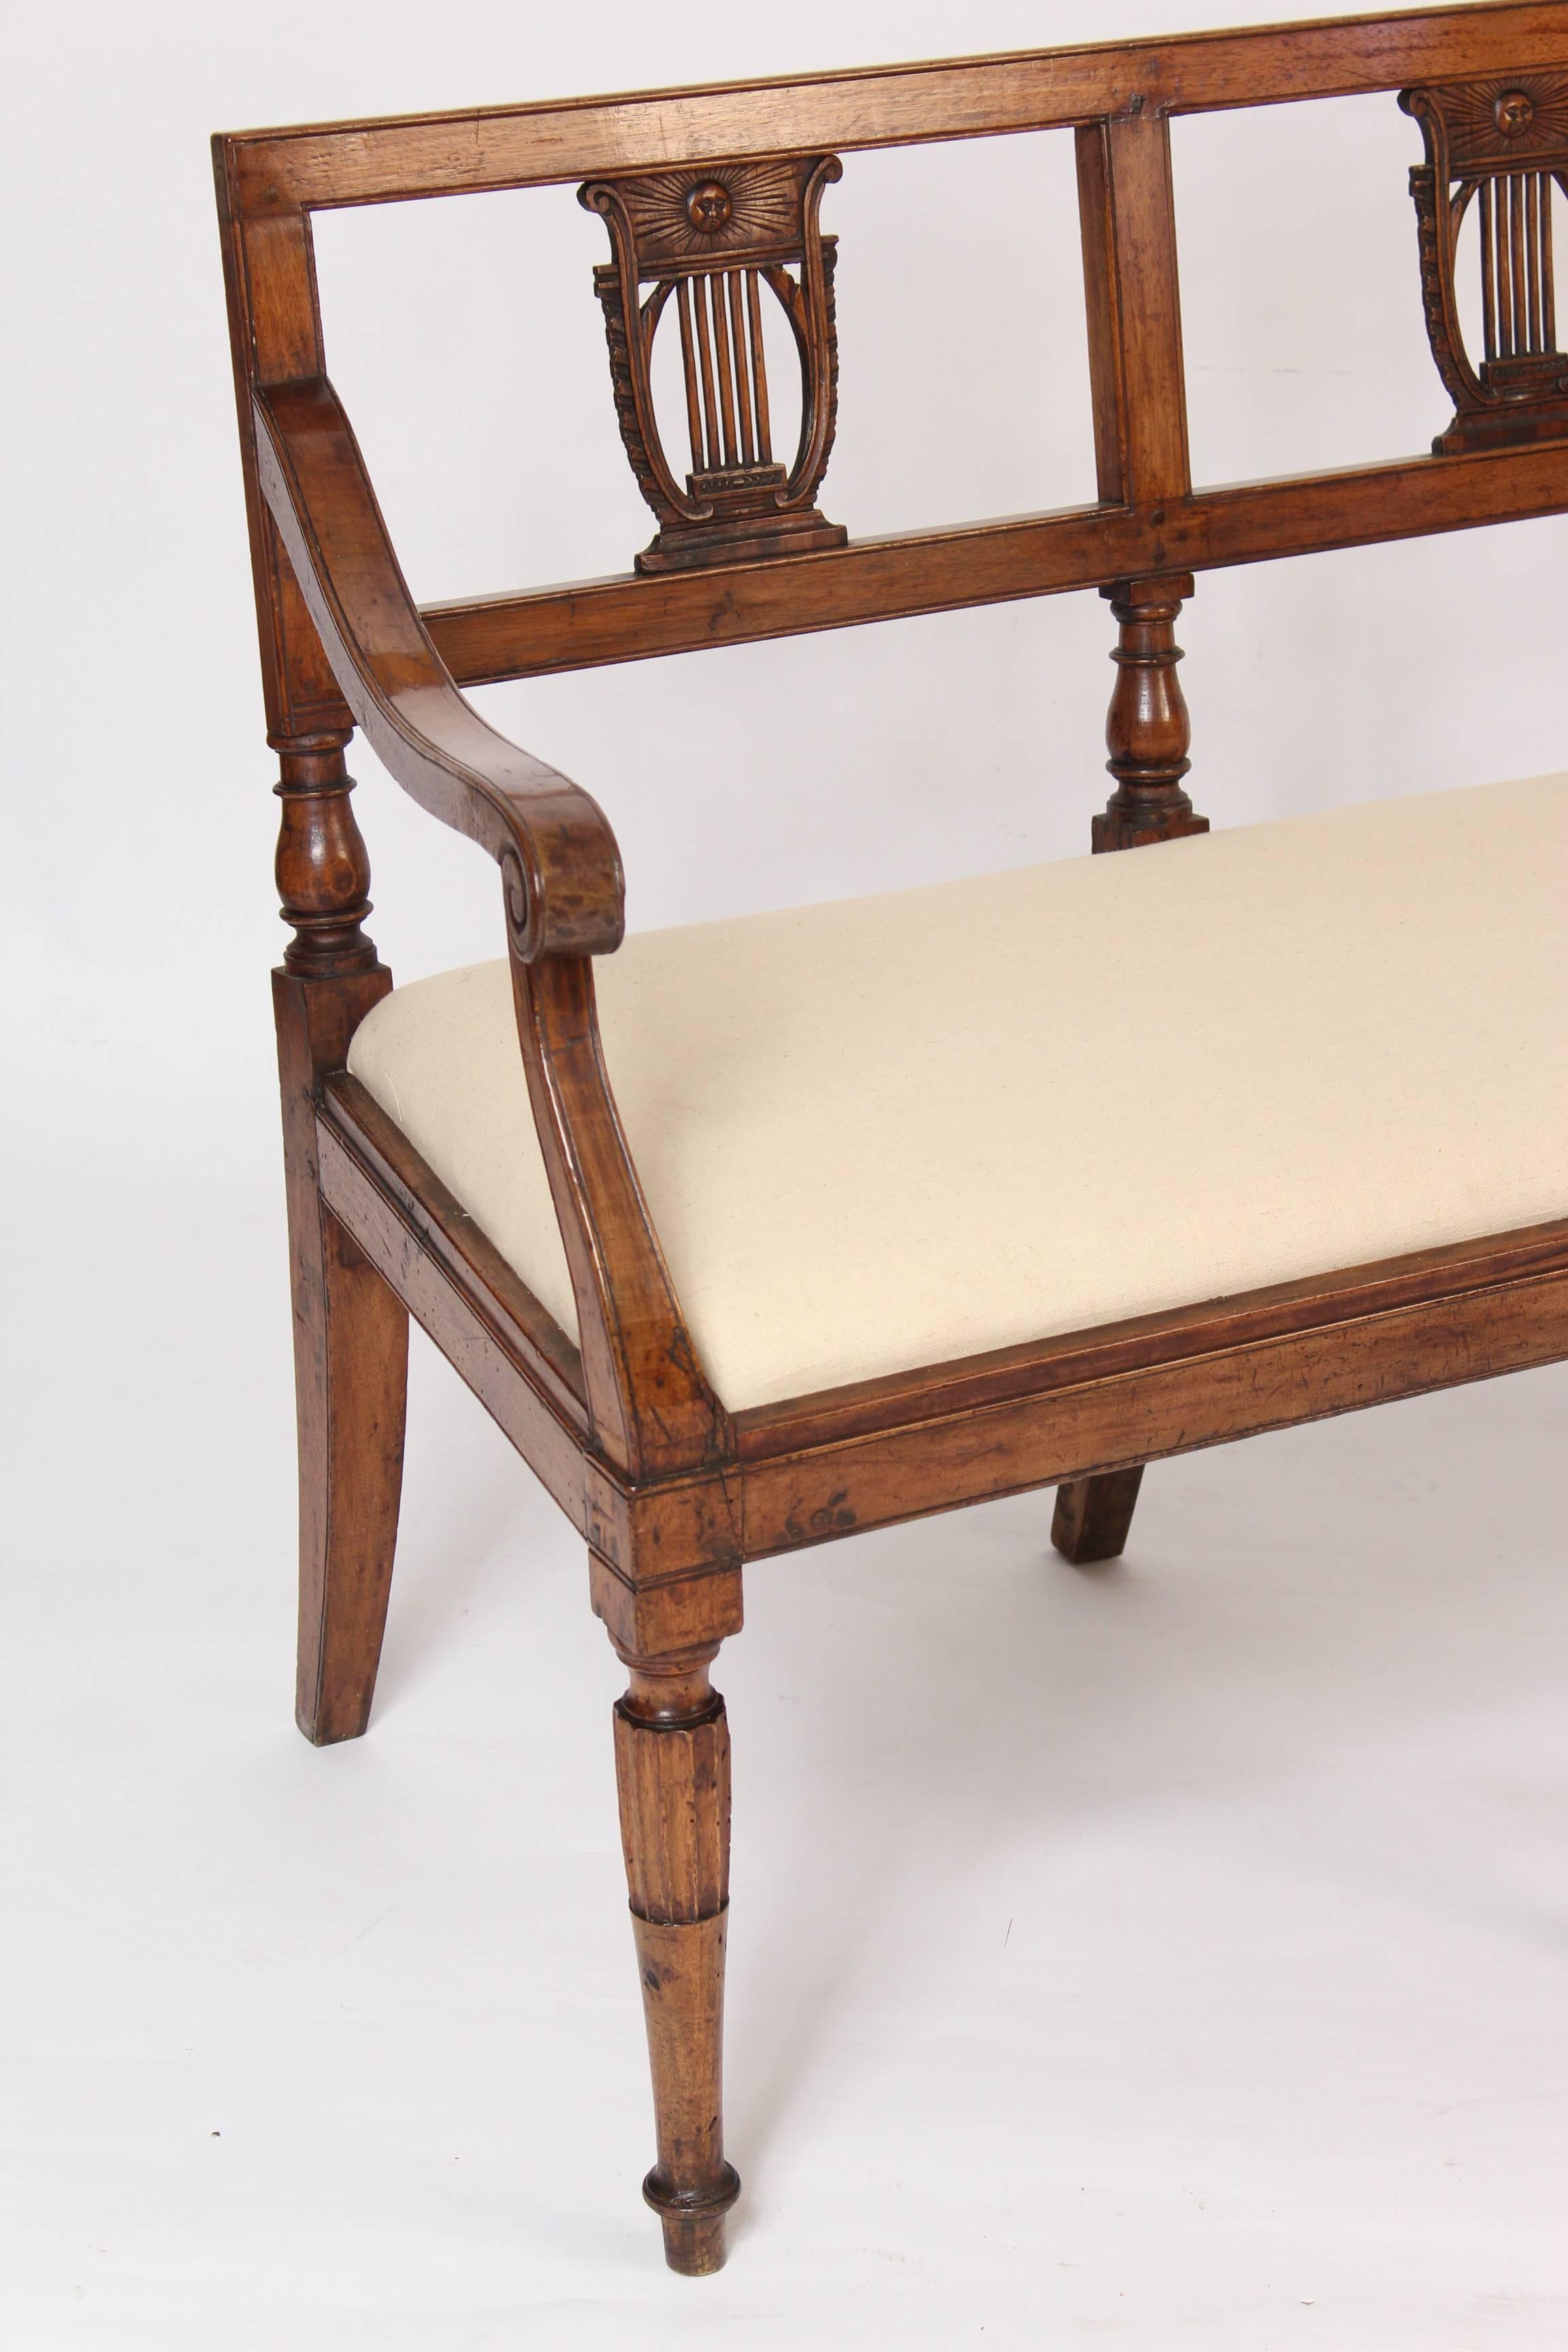 Louis XVI walnut settee with lyre shaped back splats, partially fluted and turned front legs, linen upholstery, pegged construction and an excellent old patina, made circa 1800. 